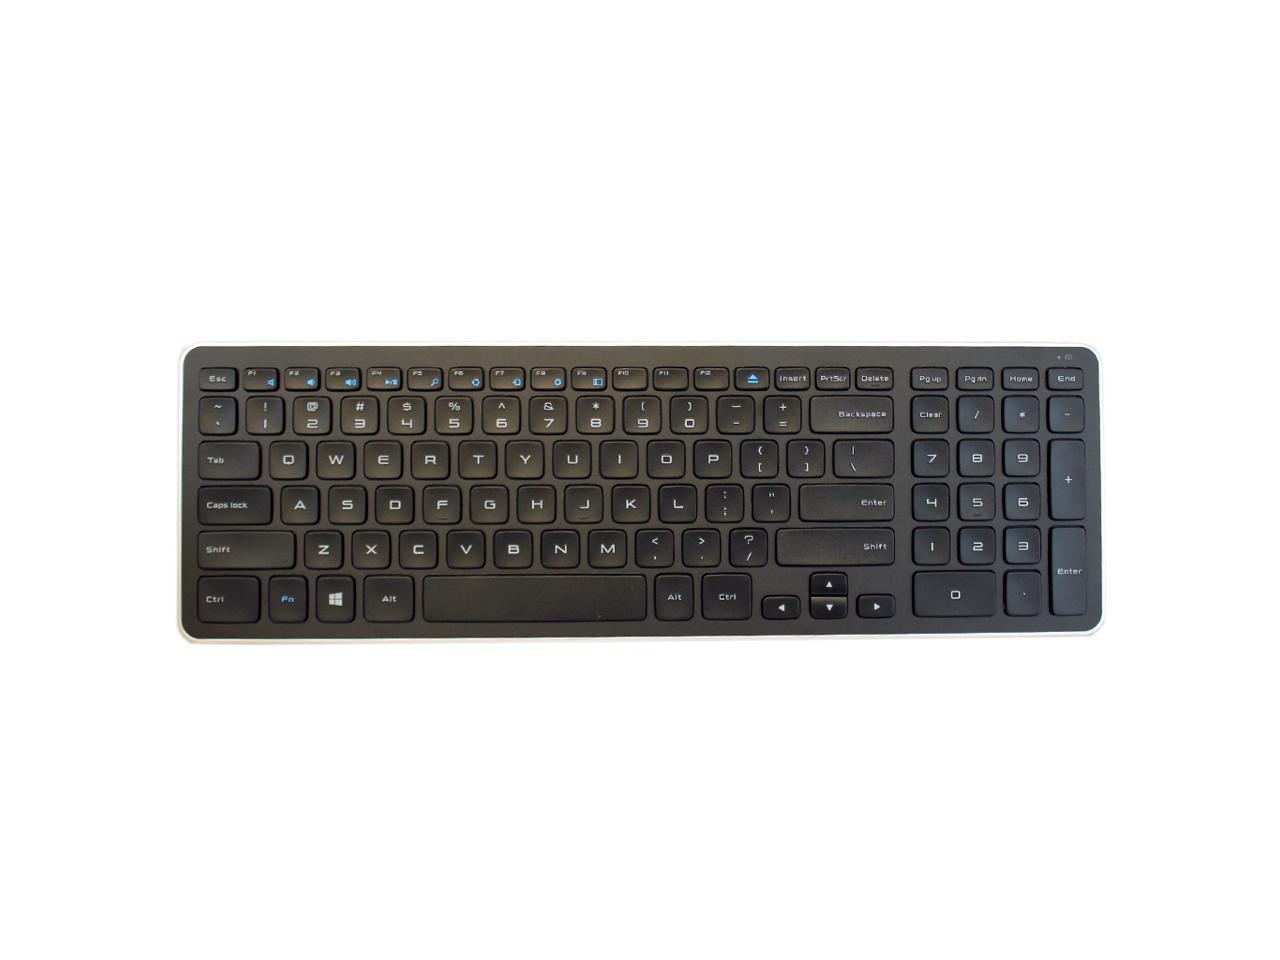 DELL - IMSOURCING 5HT18 KM714 WRLS KEYBRD/MOUSE COMBO